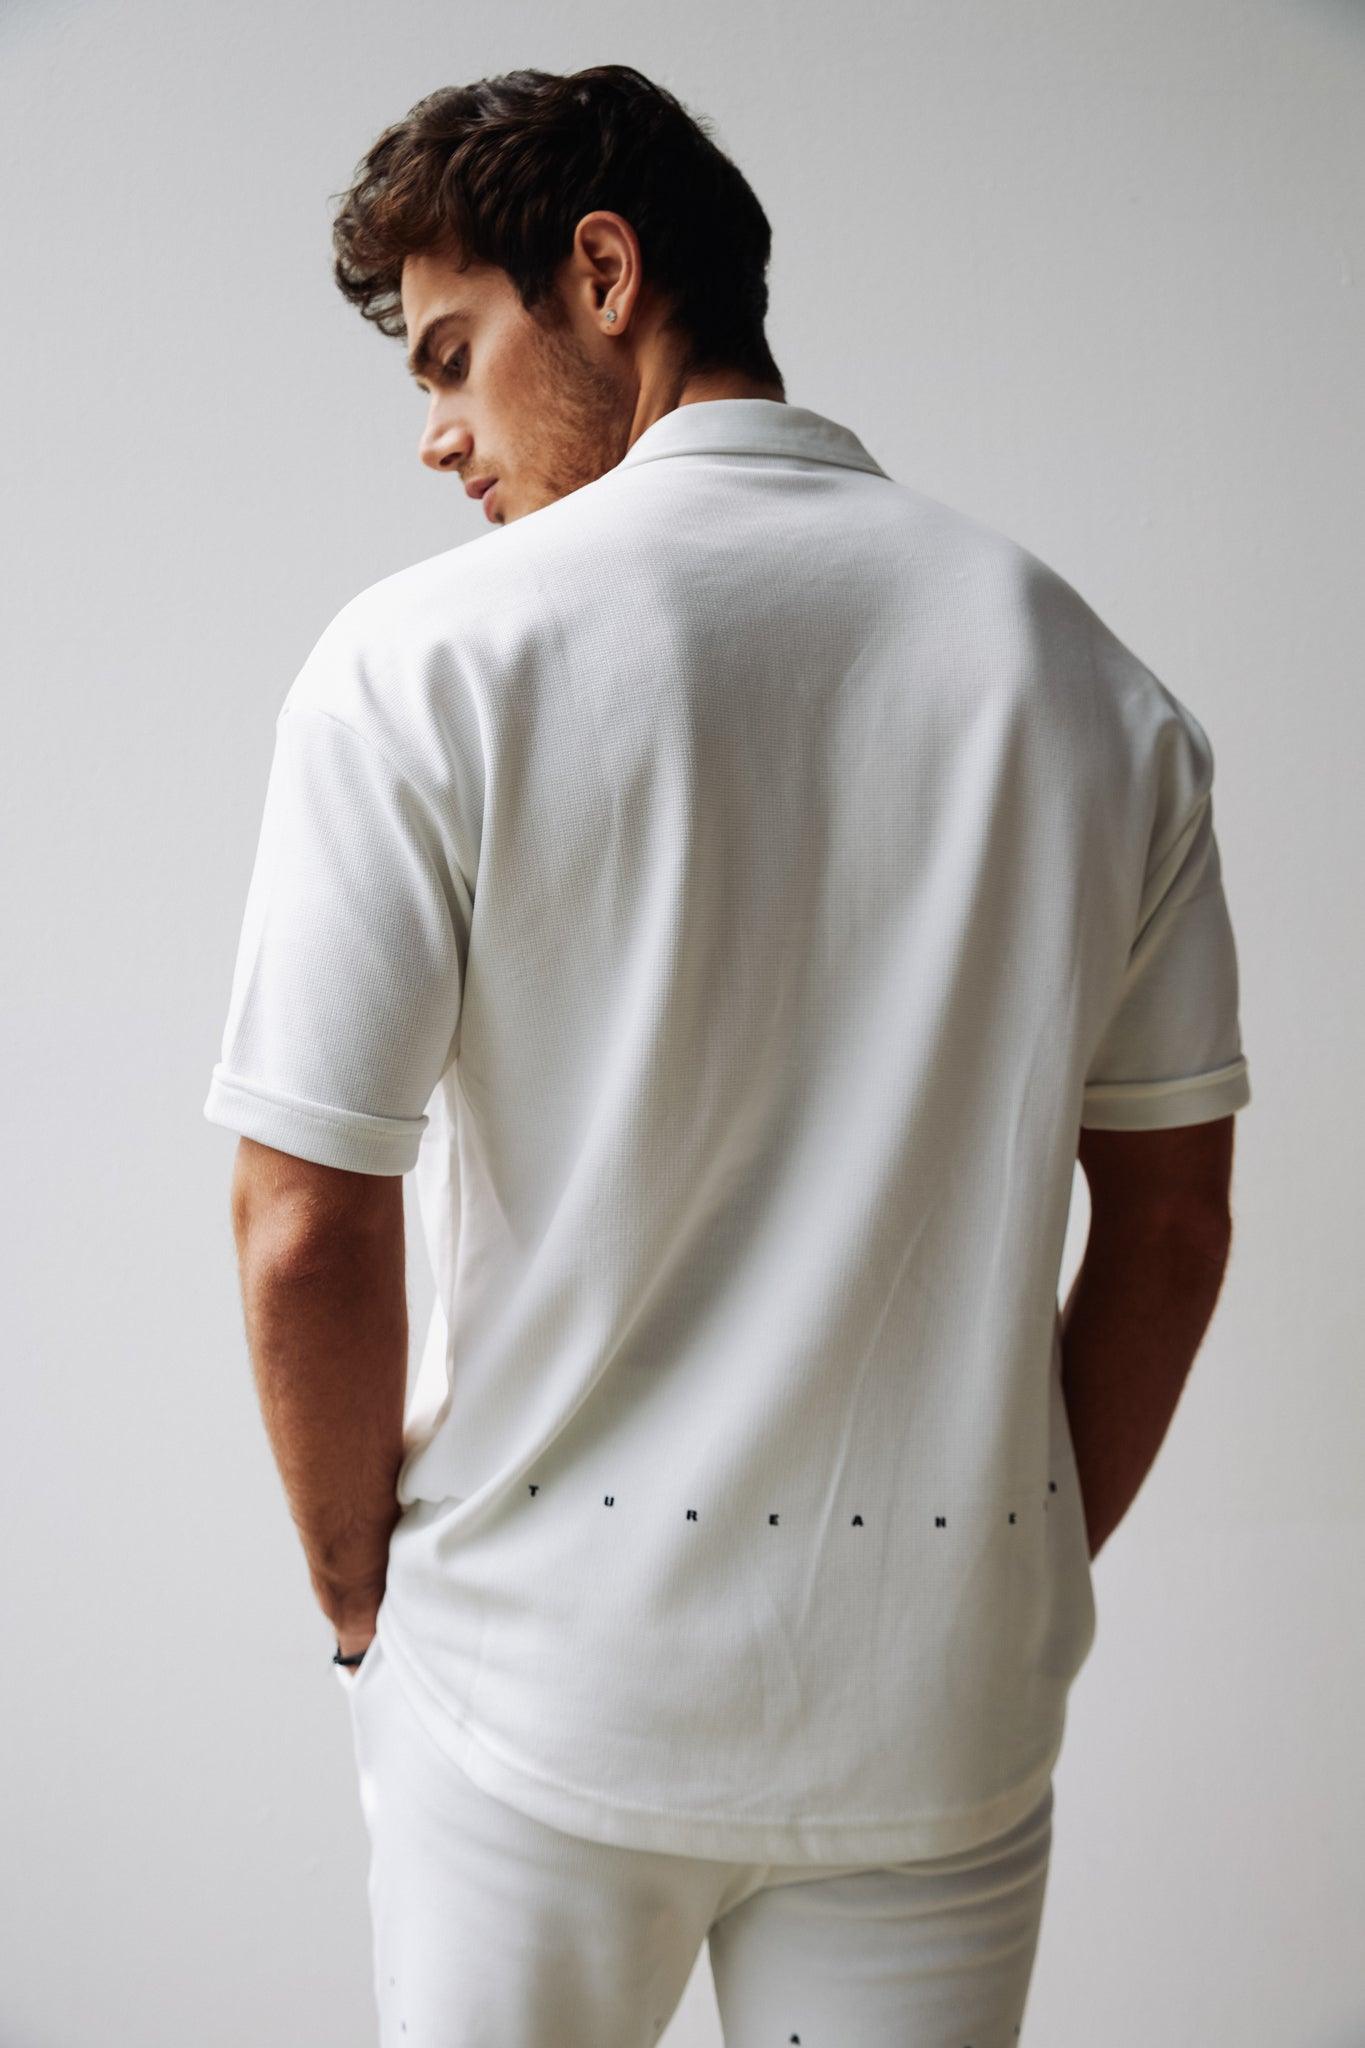 Men's White Shirt & Shorts Outfit THIMOON